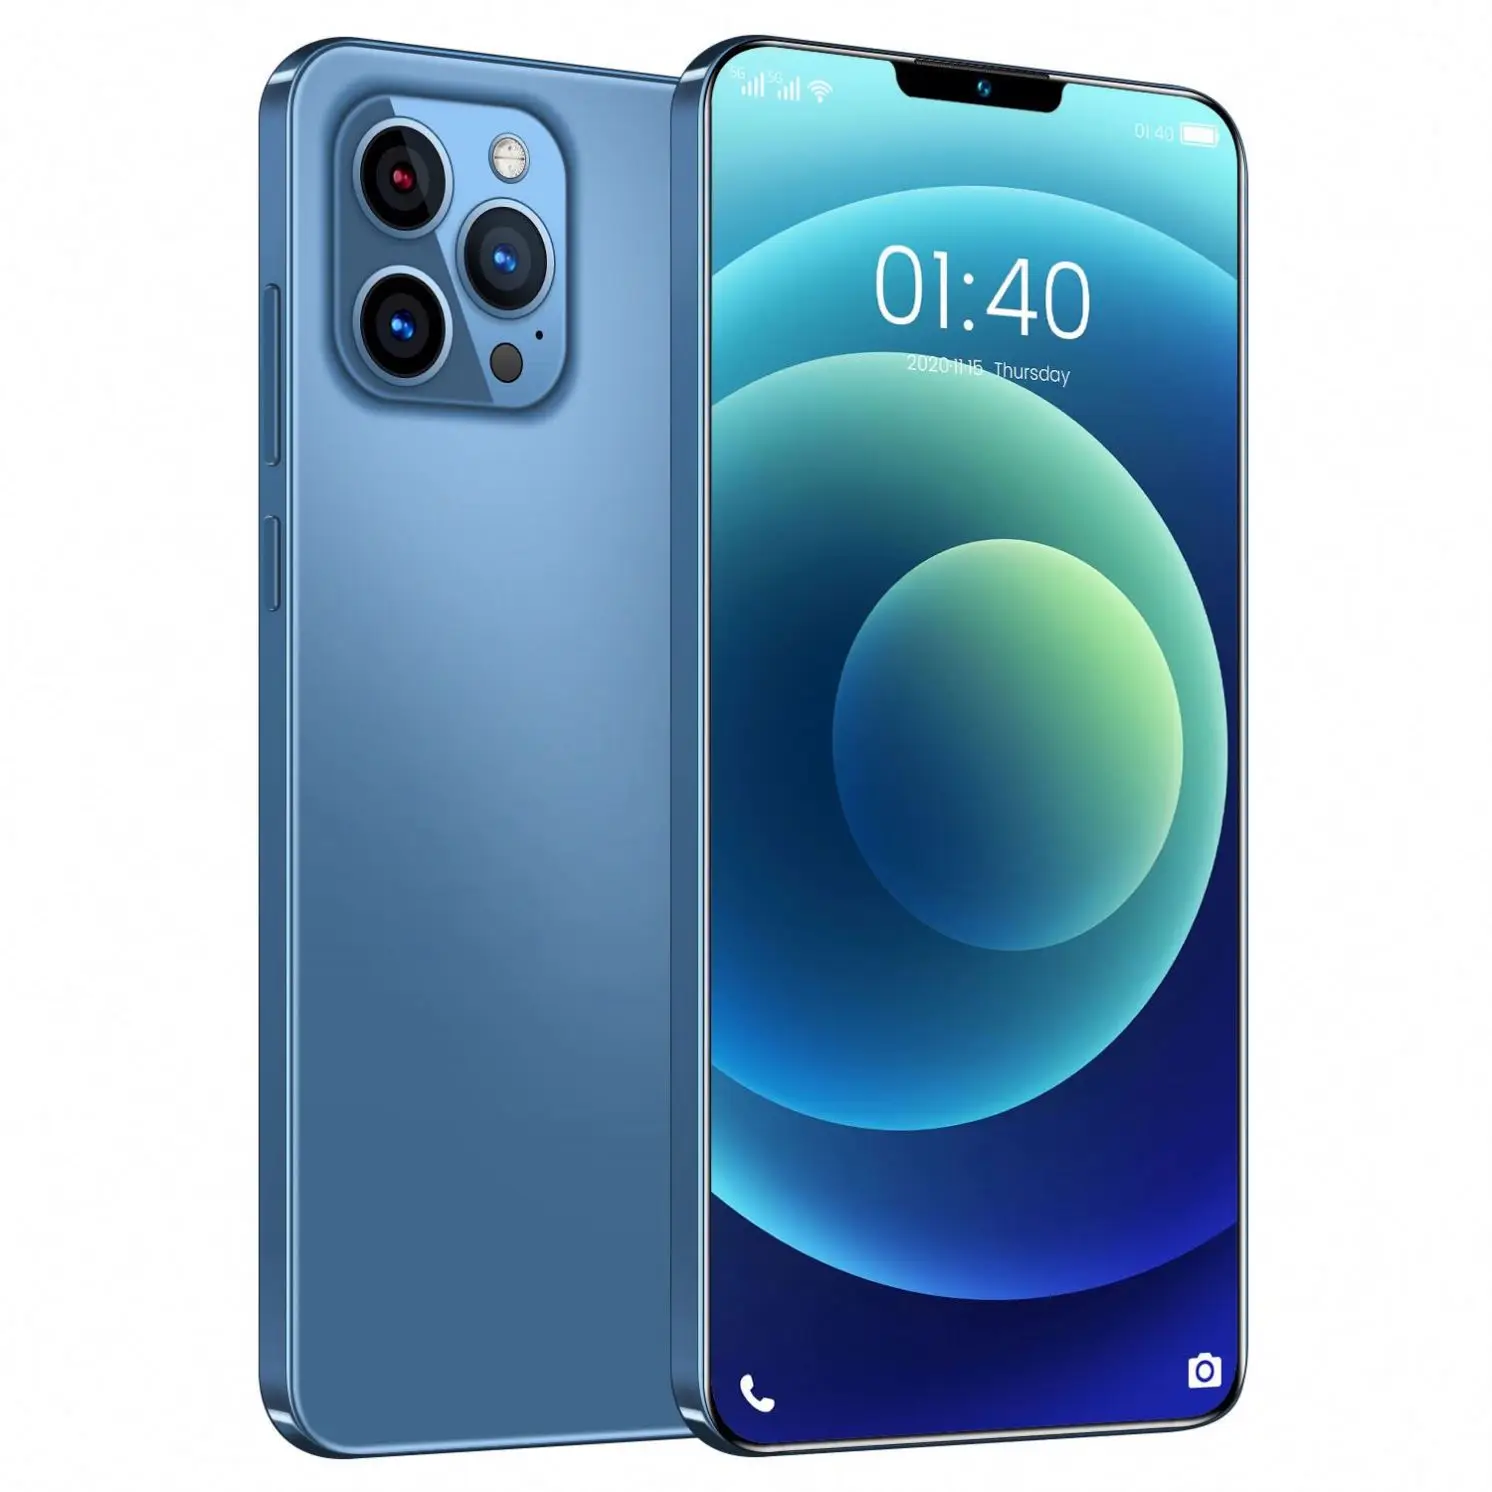 

New Original MI Unlocked Smartphone M11 Pro 12+512GB With Dual Sim Card Face Id Unlock Android 10.0 Mobile Phone, Blue/black/gold/white